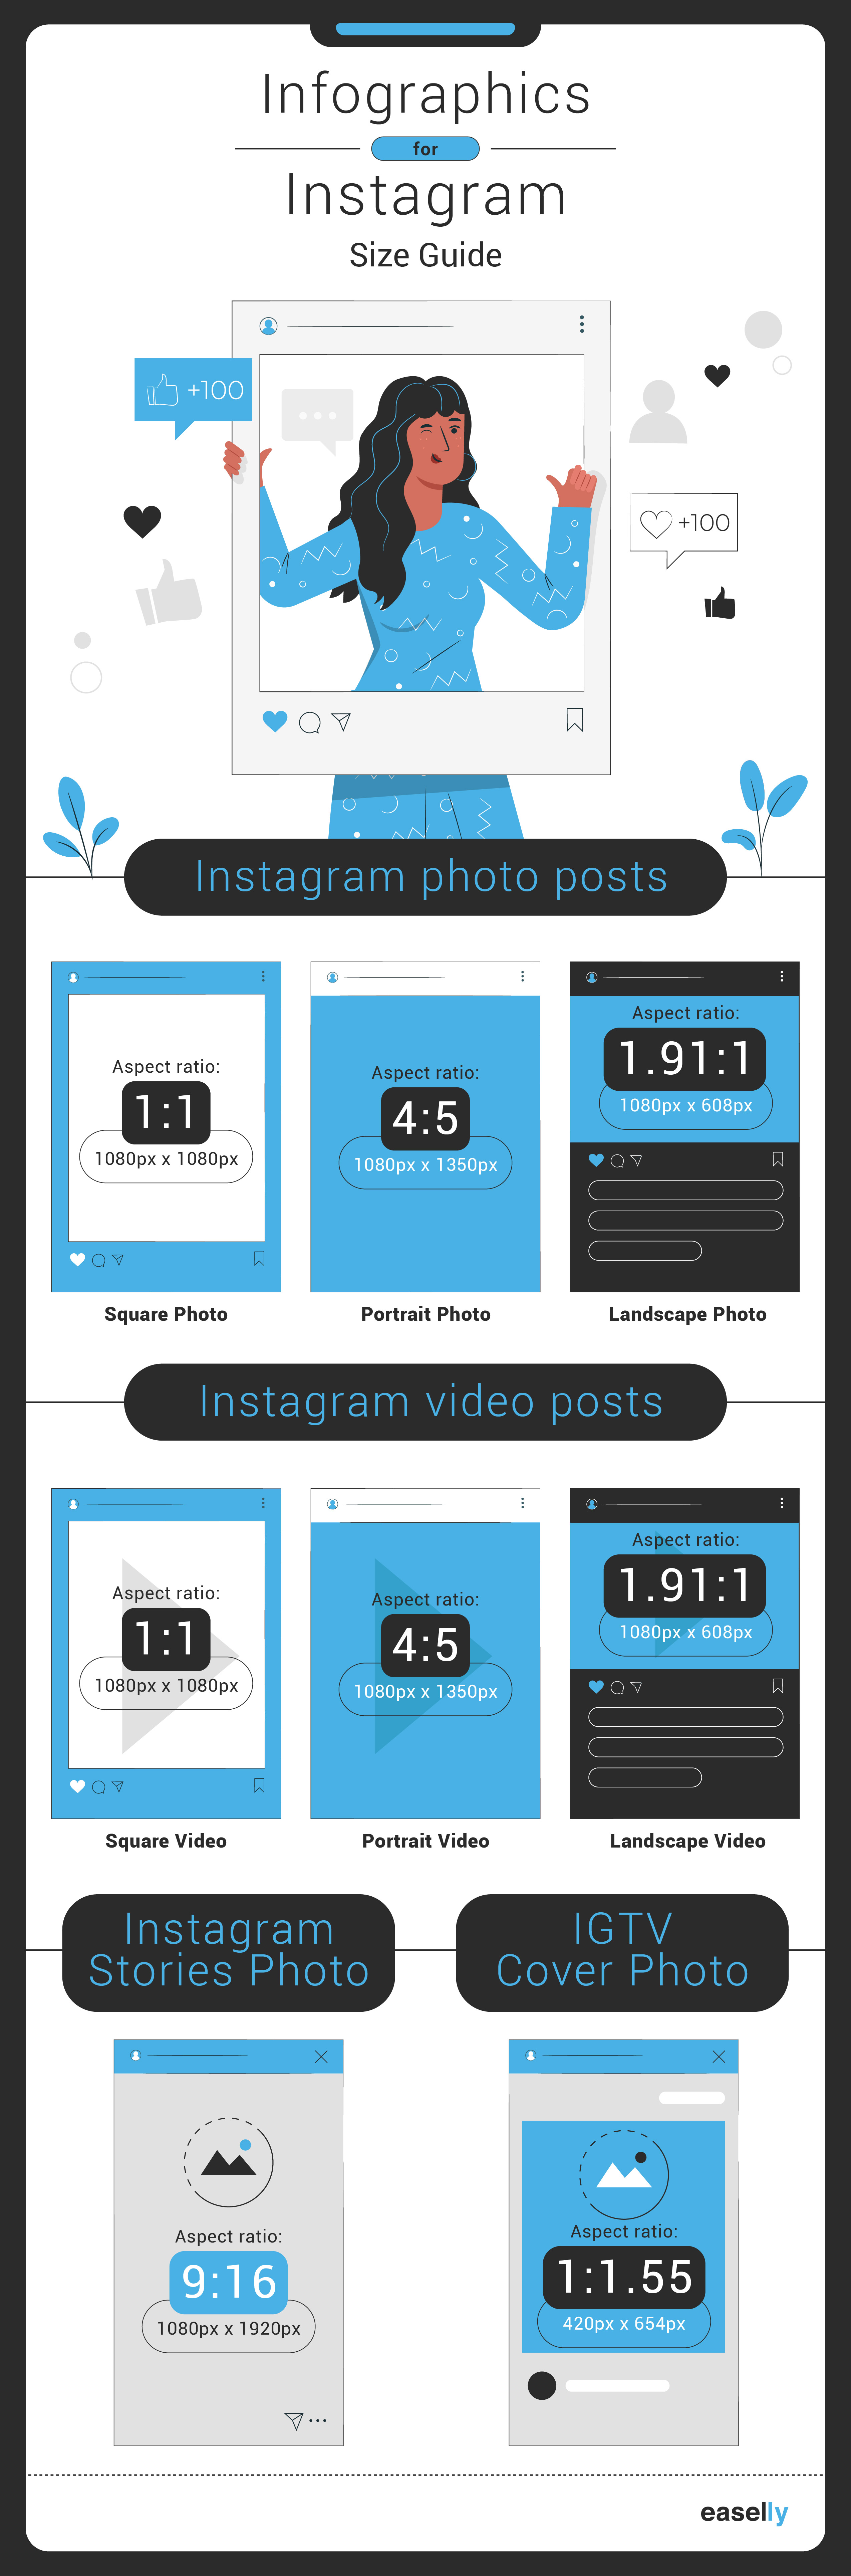 How To Make An Infographic On Instagram